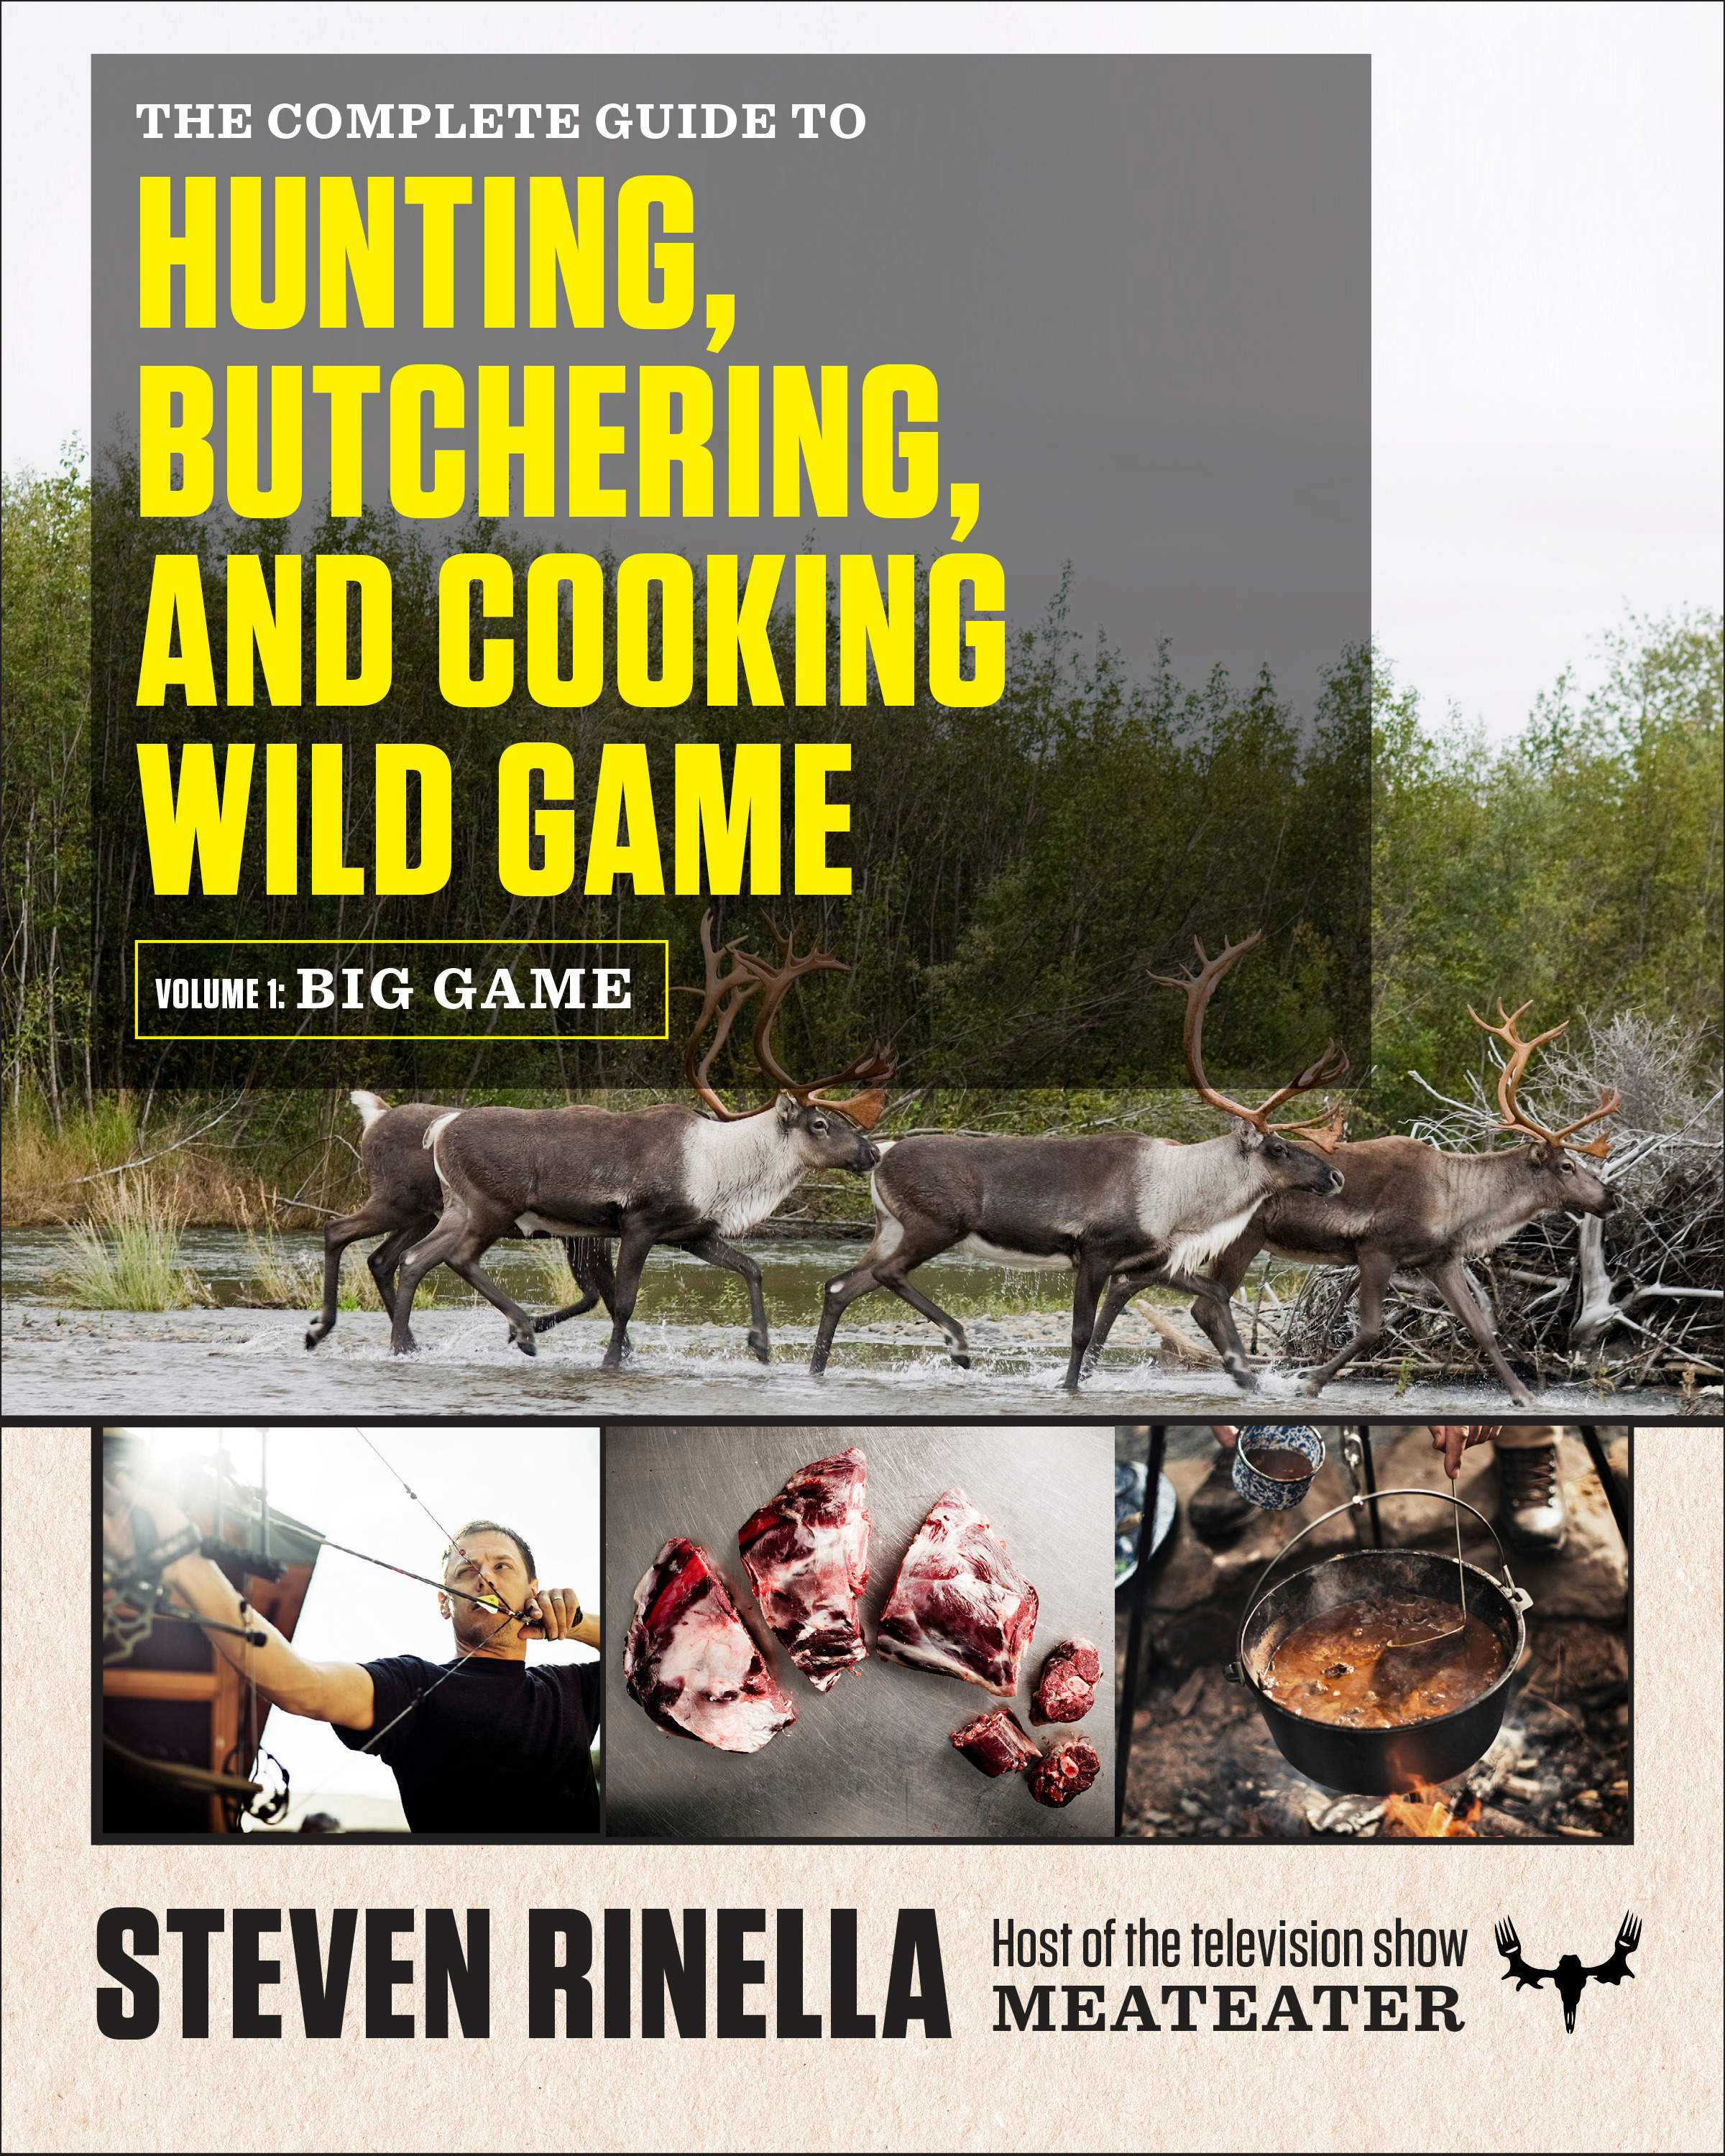 The Complete Guide to Hunting, Butchering, and Cooking Wild Game Vol. 1:  Big Game Book by Steven Rinella